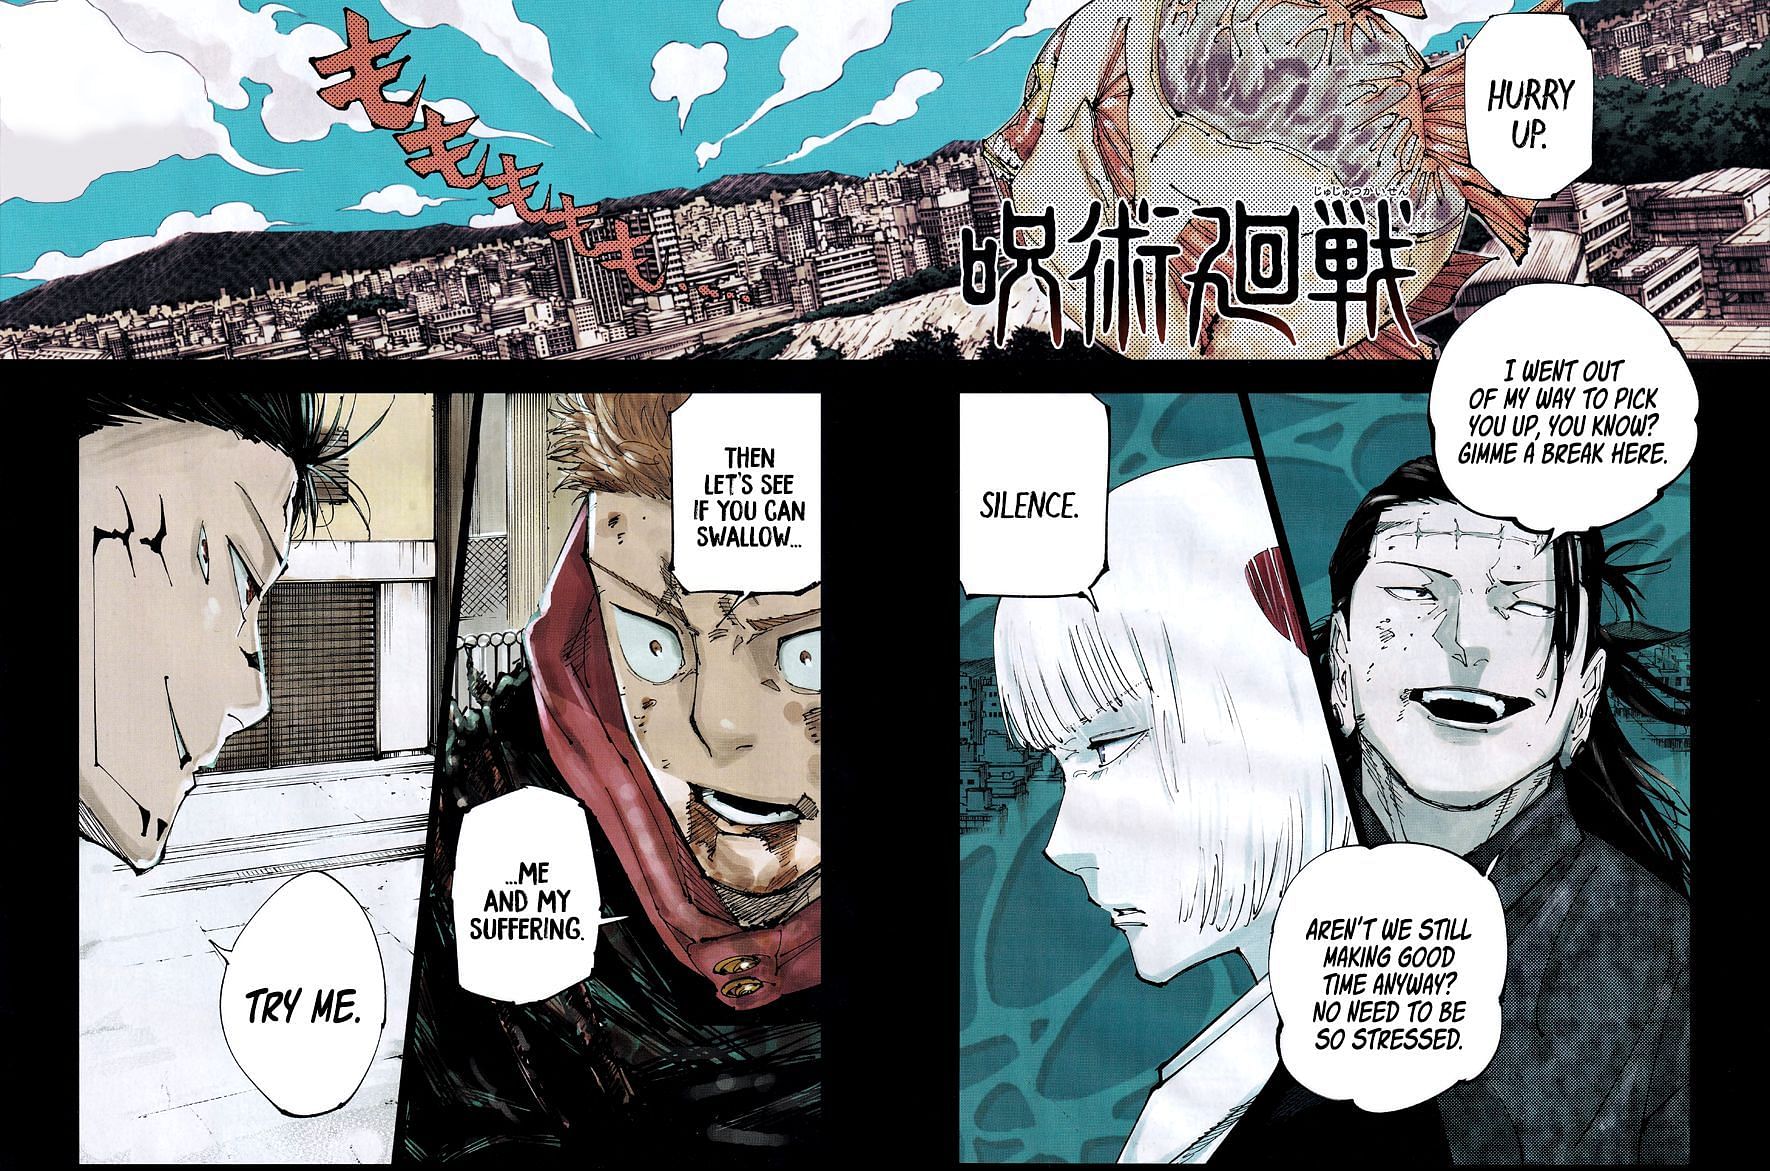 WE FIND OUT WHAT SUKUNA DID TO YUJI / Jujutsu Kaisen Chapter 215